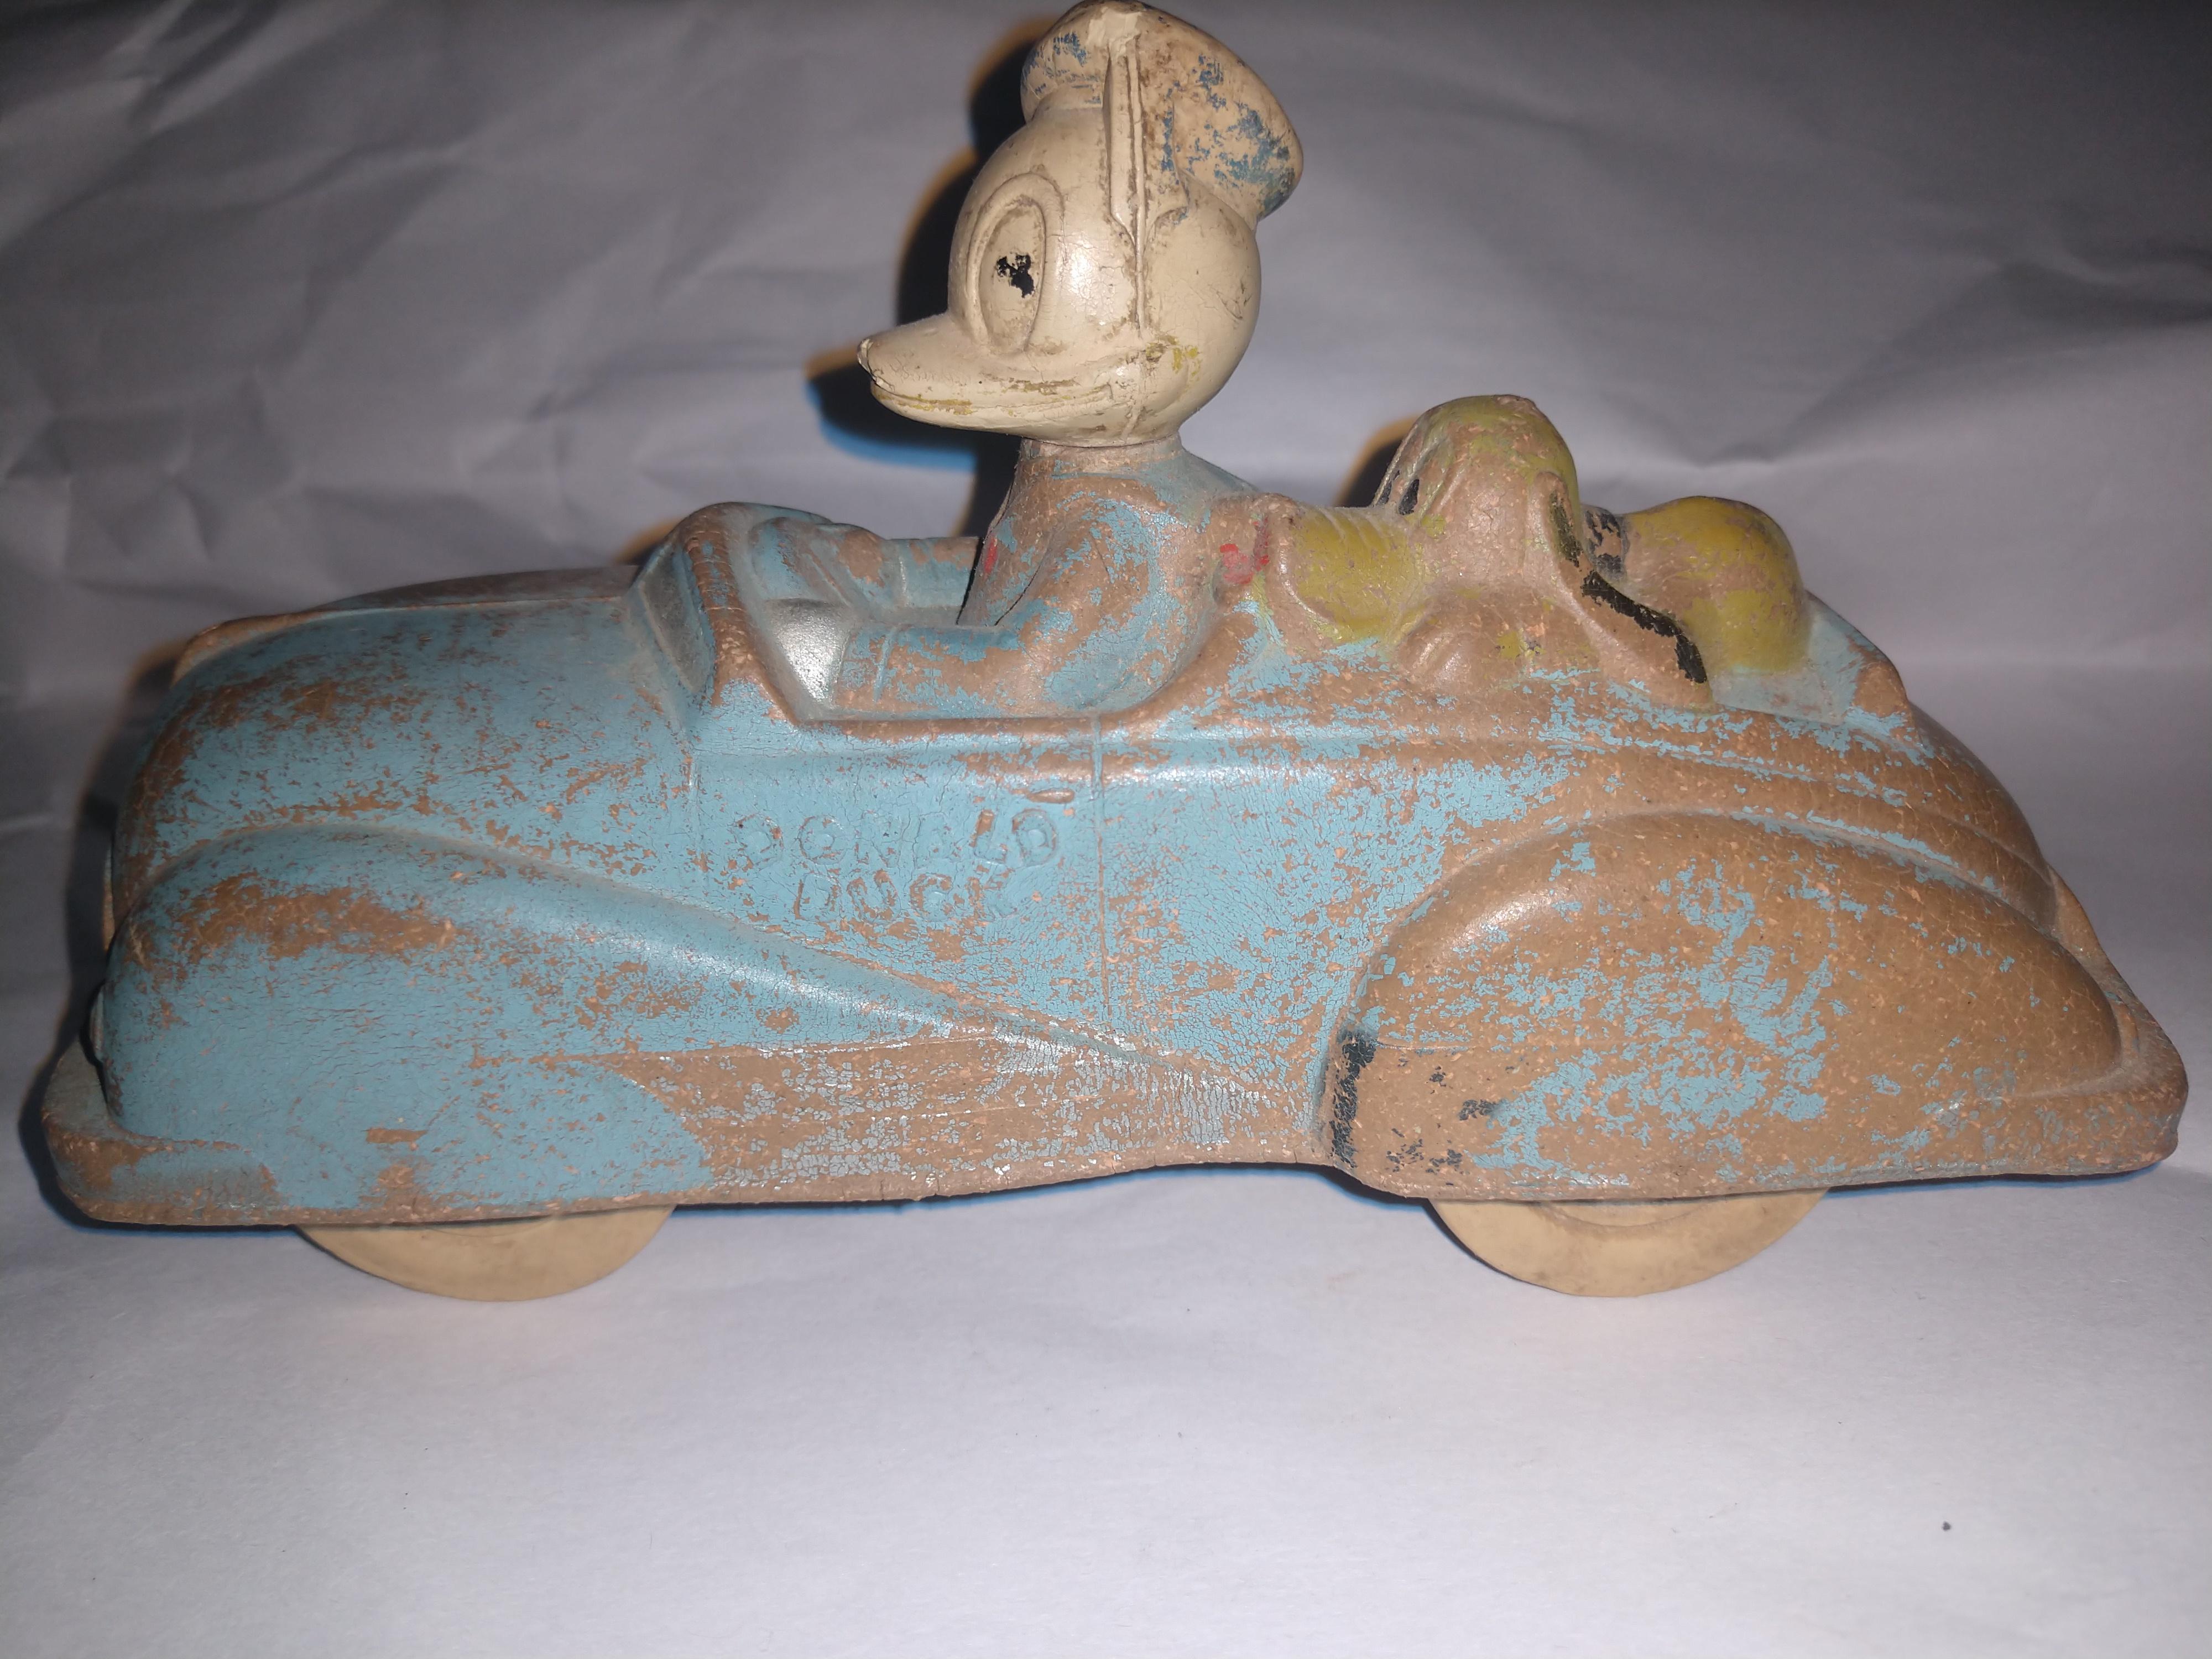 A blast from the past, Donald Duck and Pluto in the sun rubber convertible. Totally intact with the color faded.